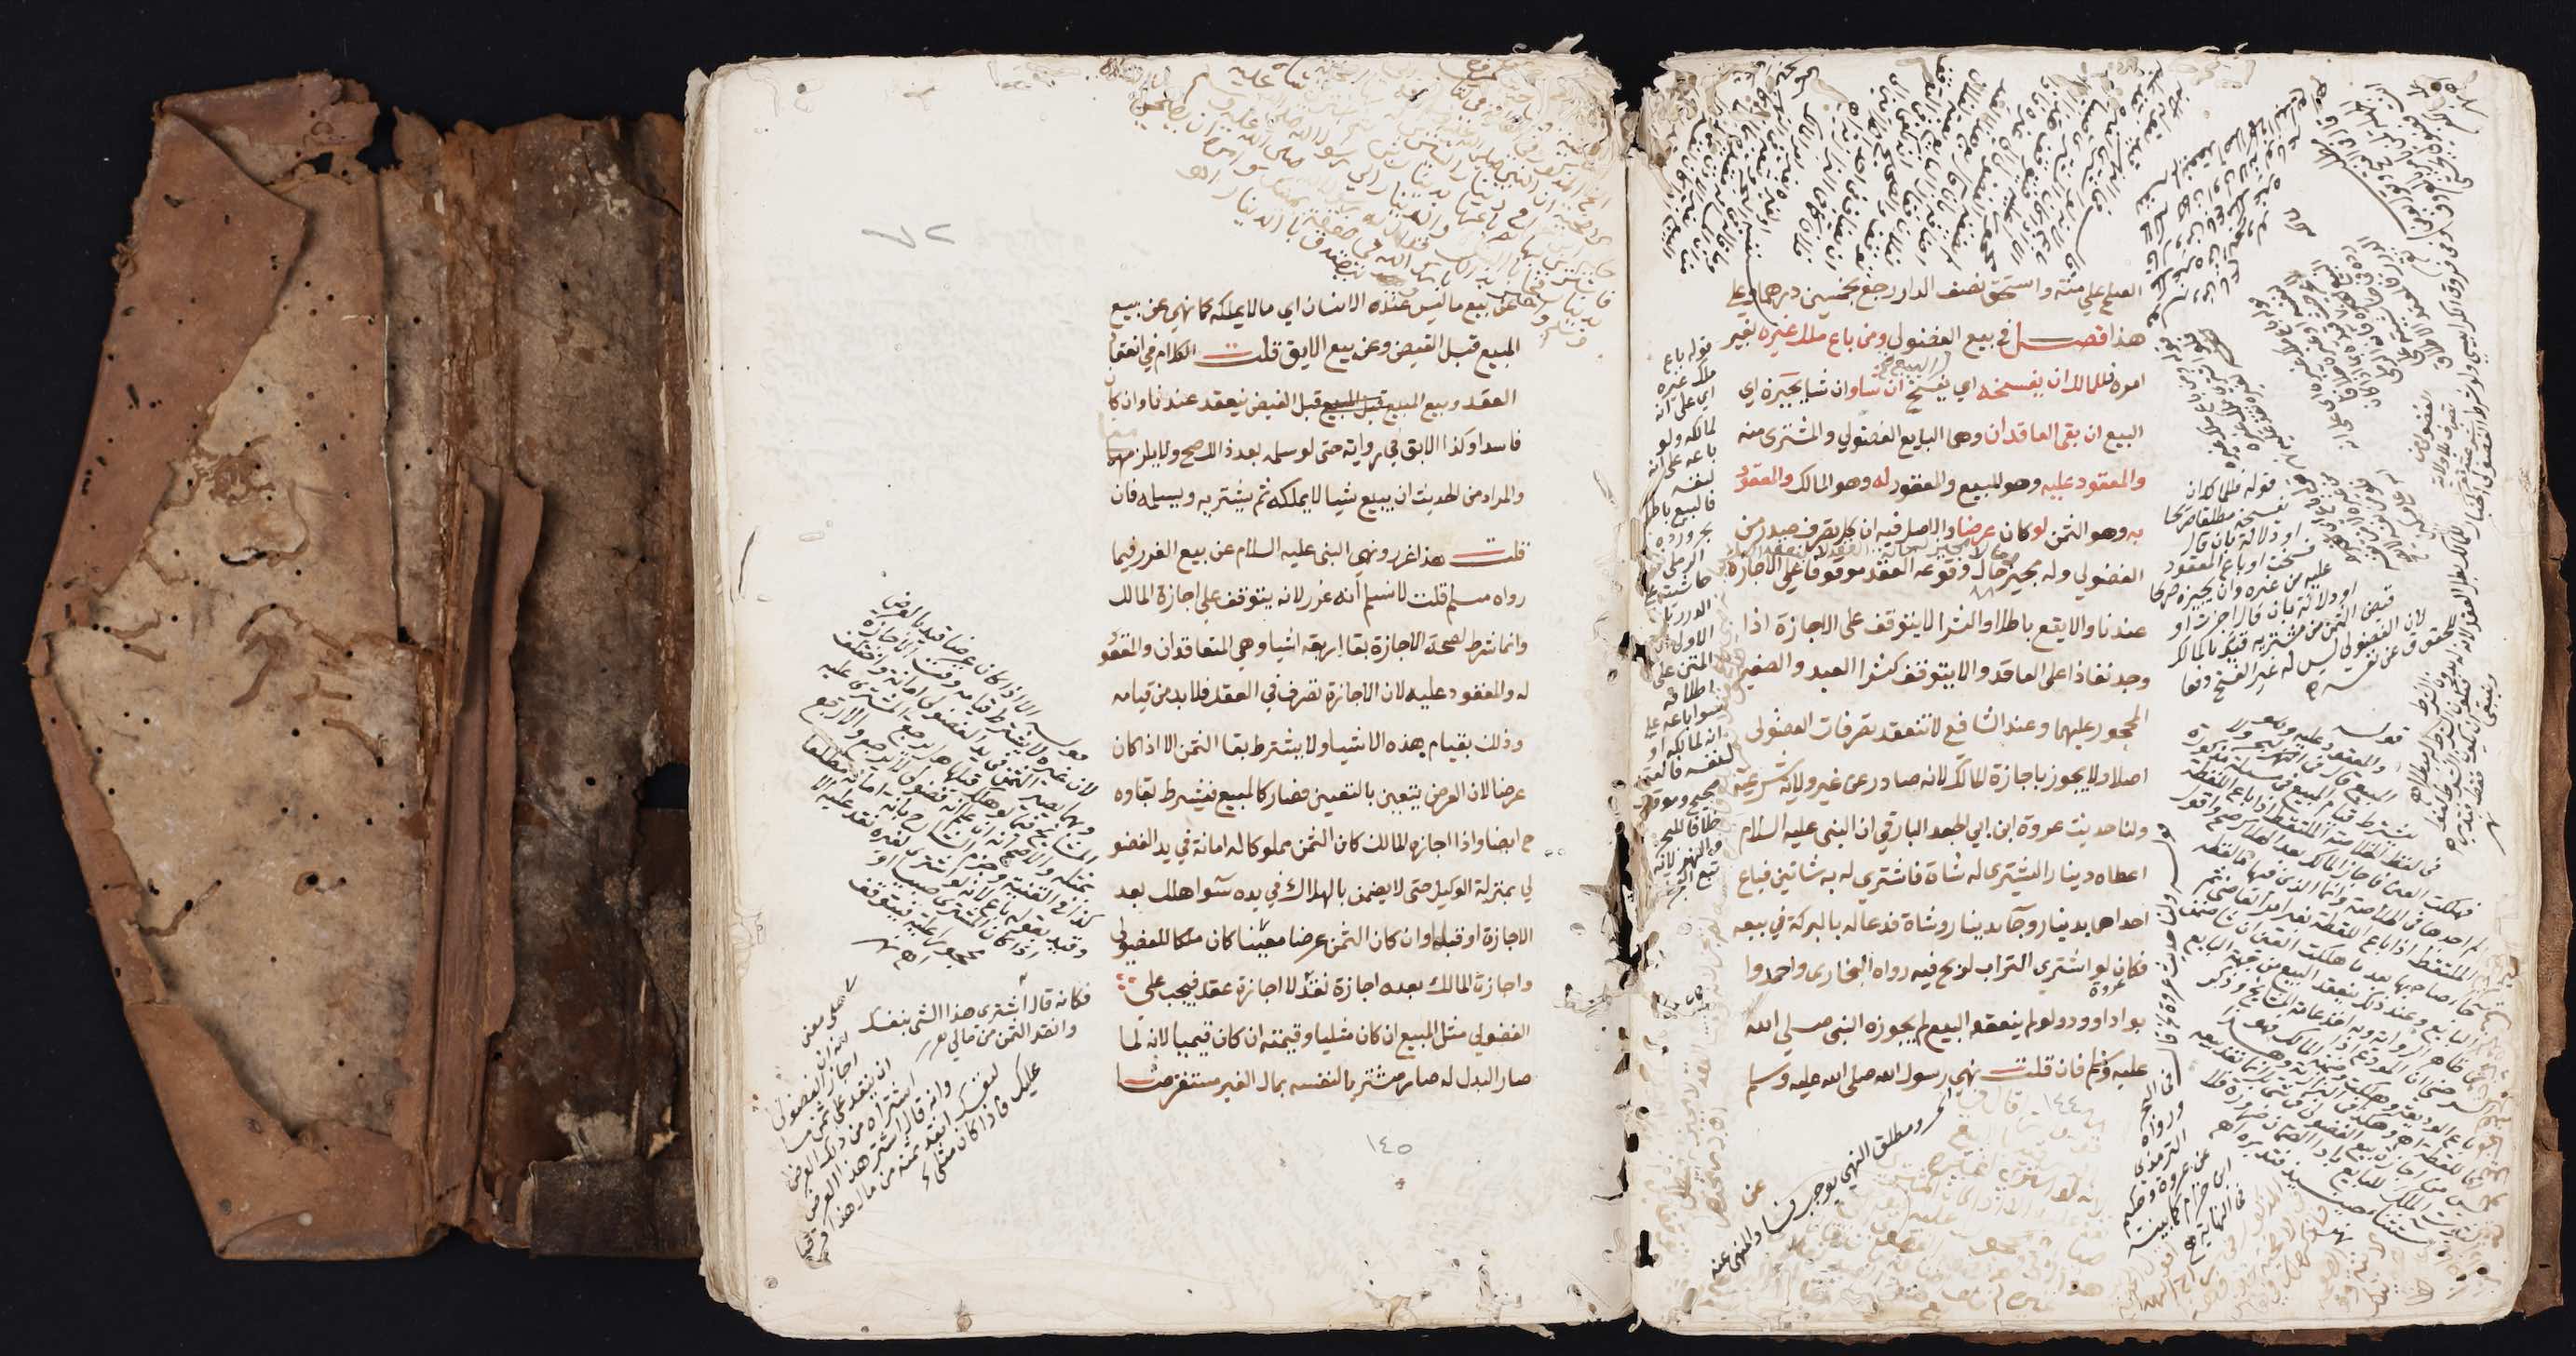 Treatise on Hanafi law, in the collection of the Great Omari Mosque, Gaza City, Gaza. (OMM 68)